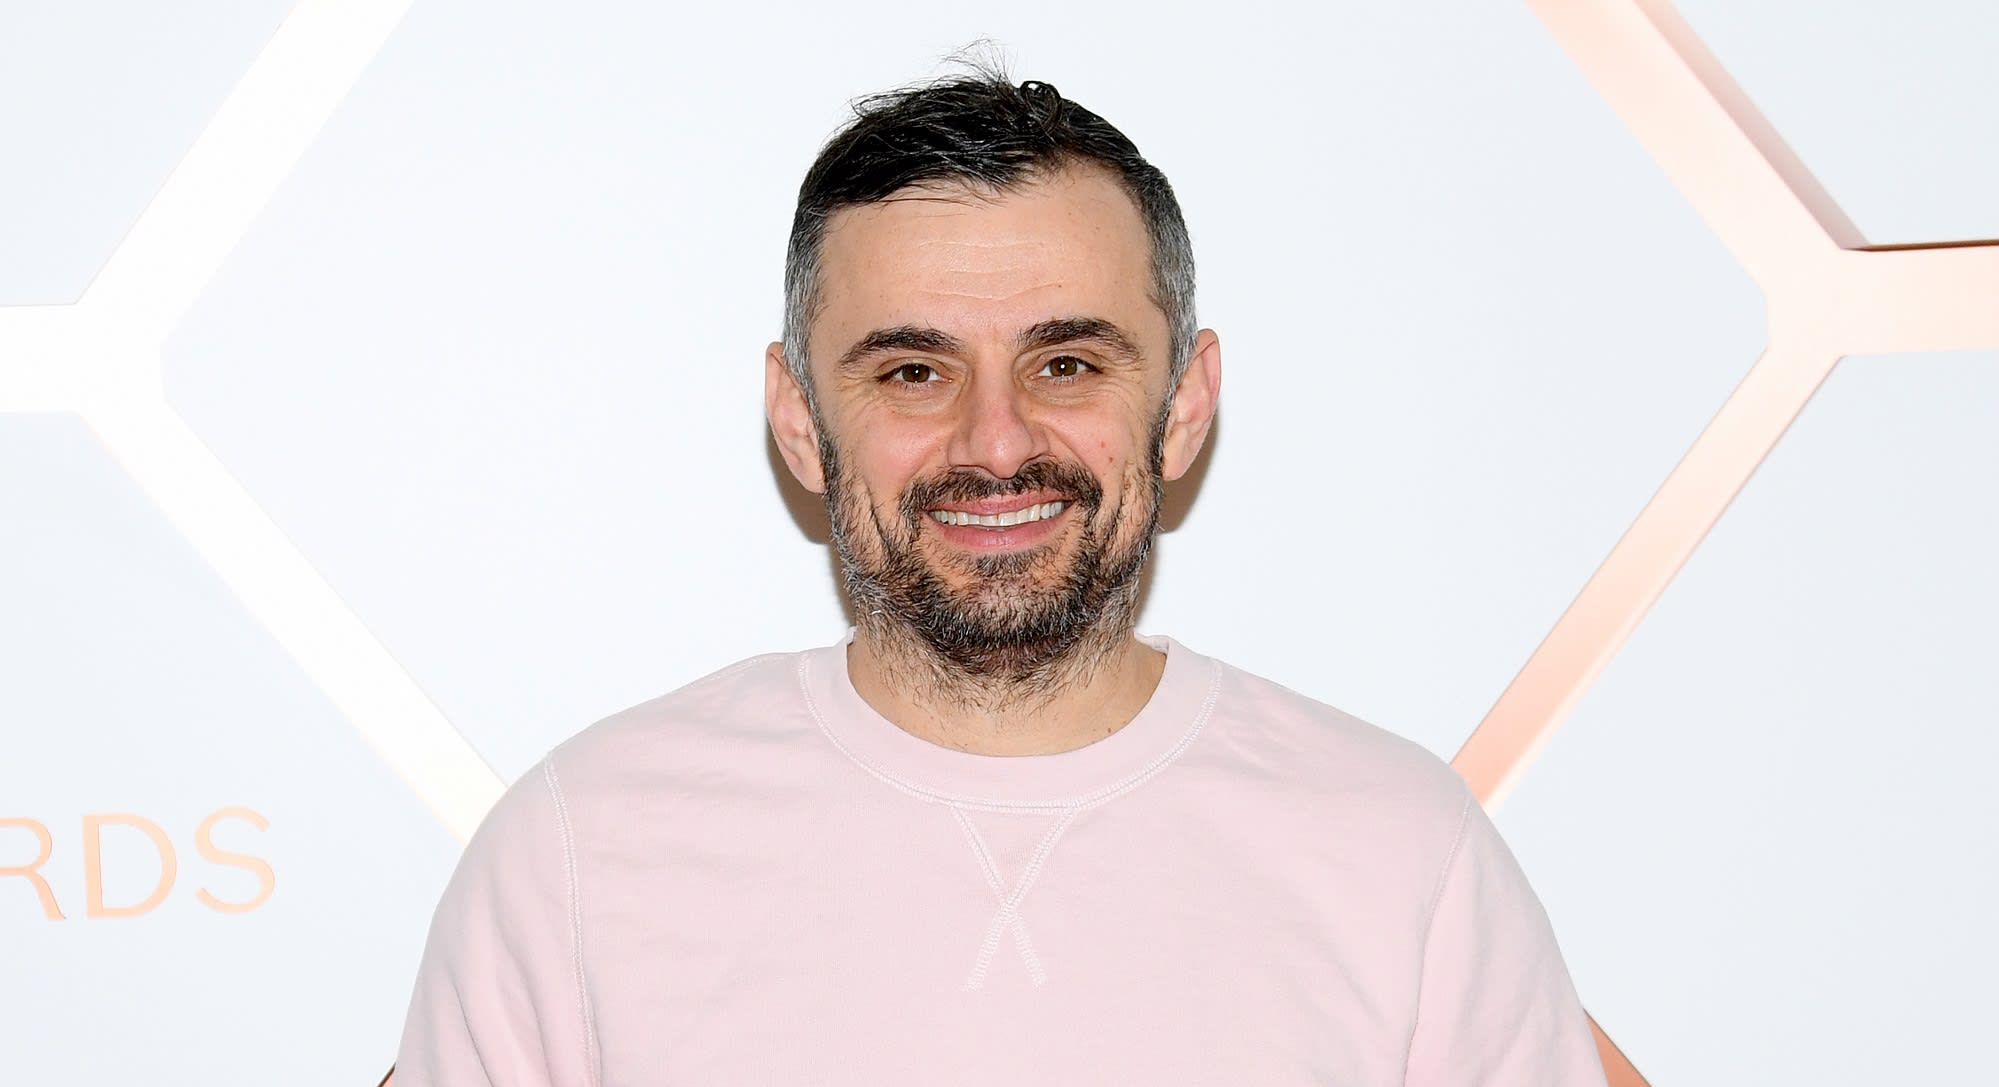 Gary Vee: There will be an NFT bubble, but the average investor can still make money. Here's how